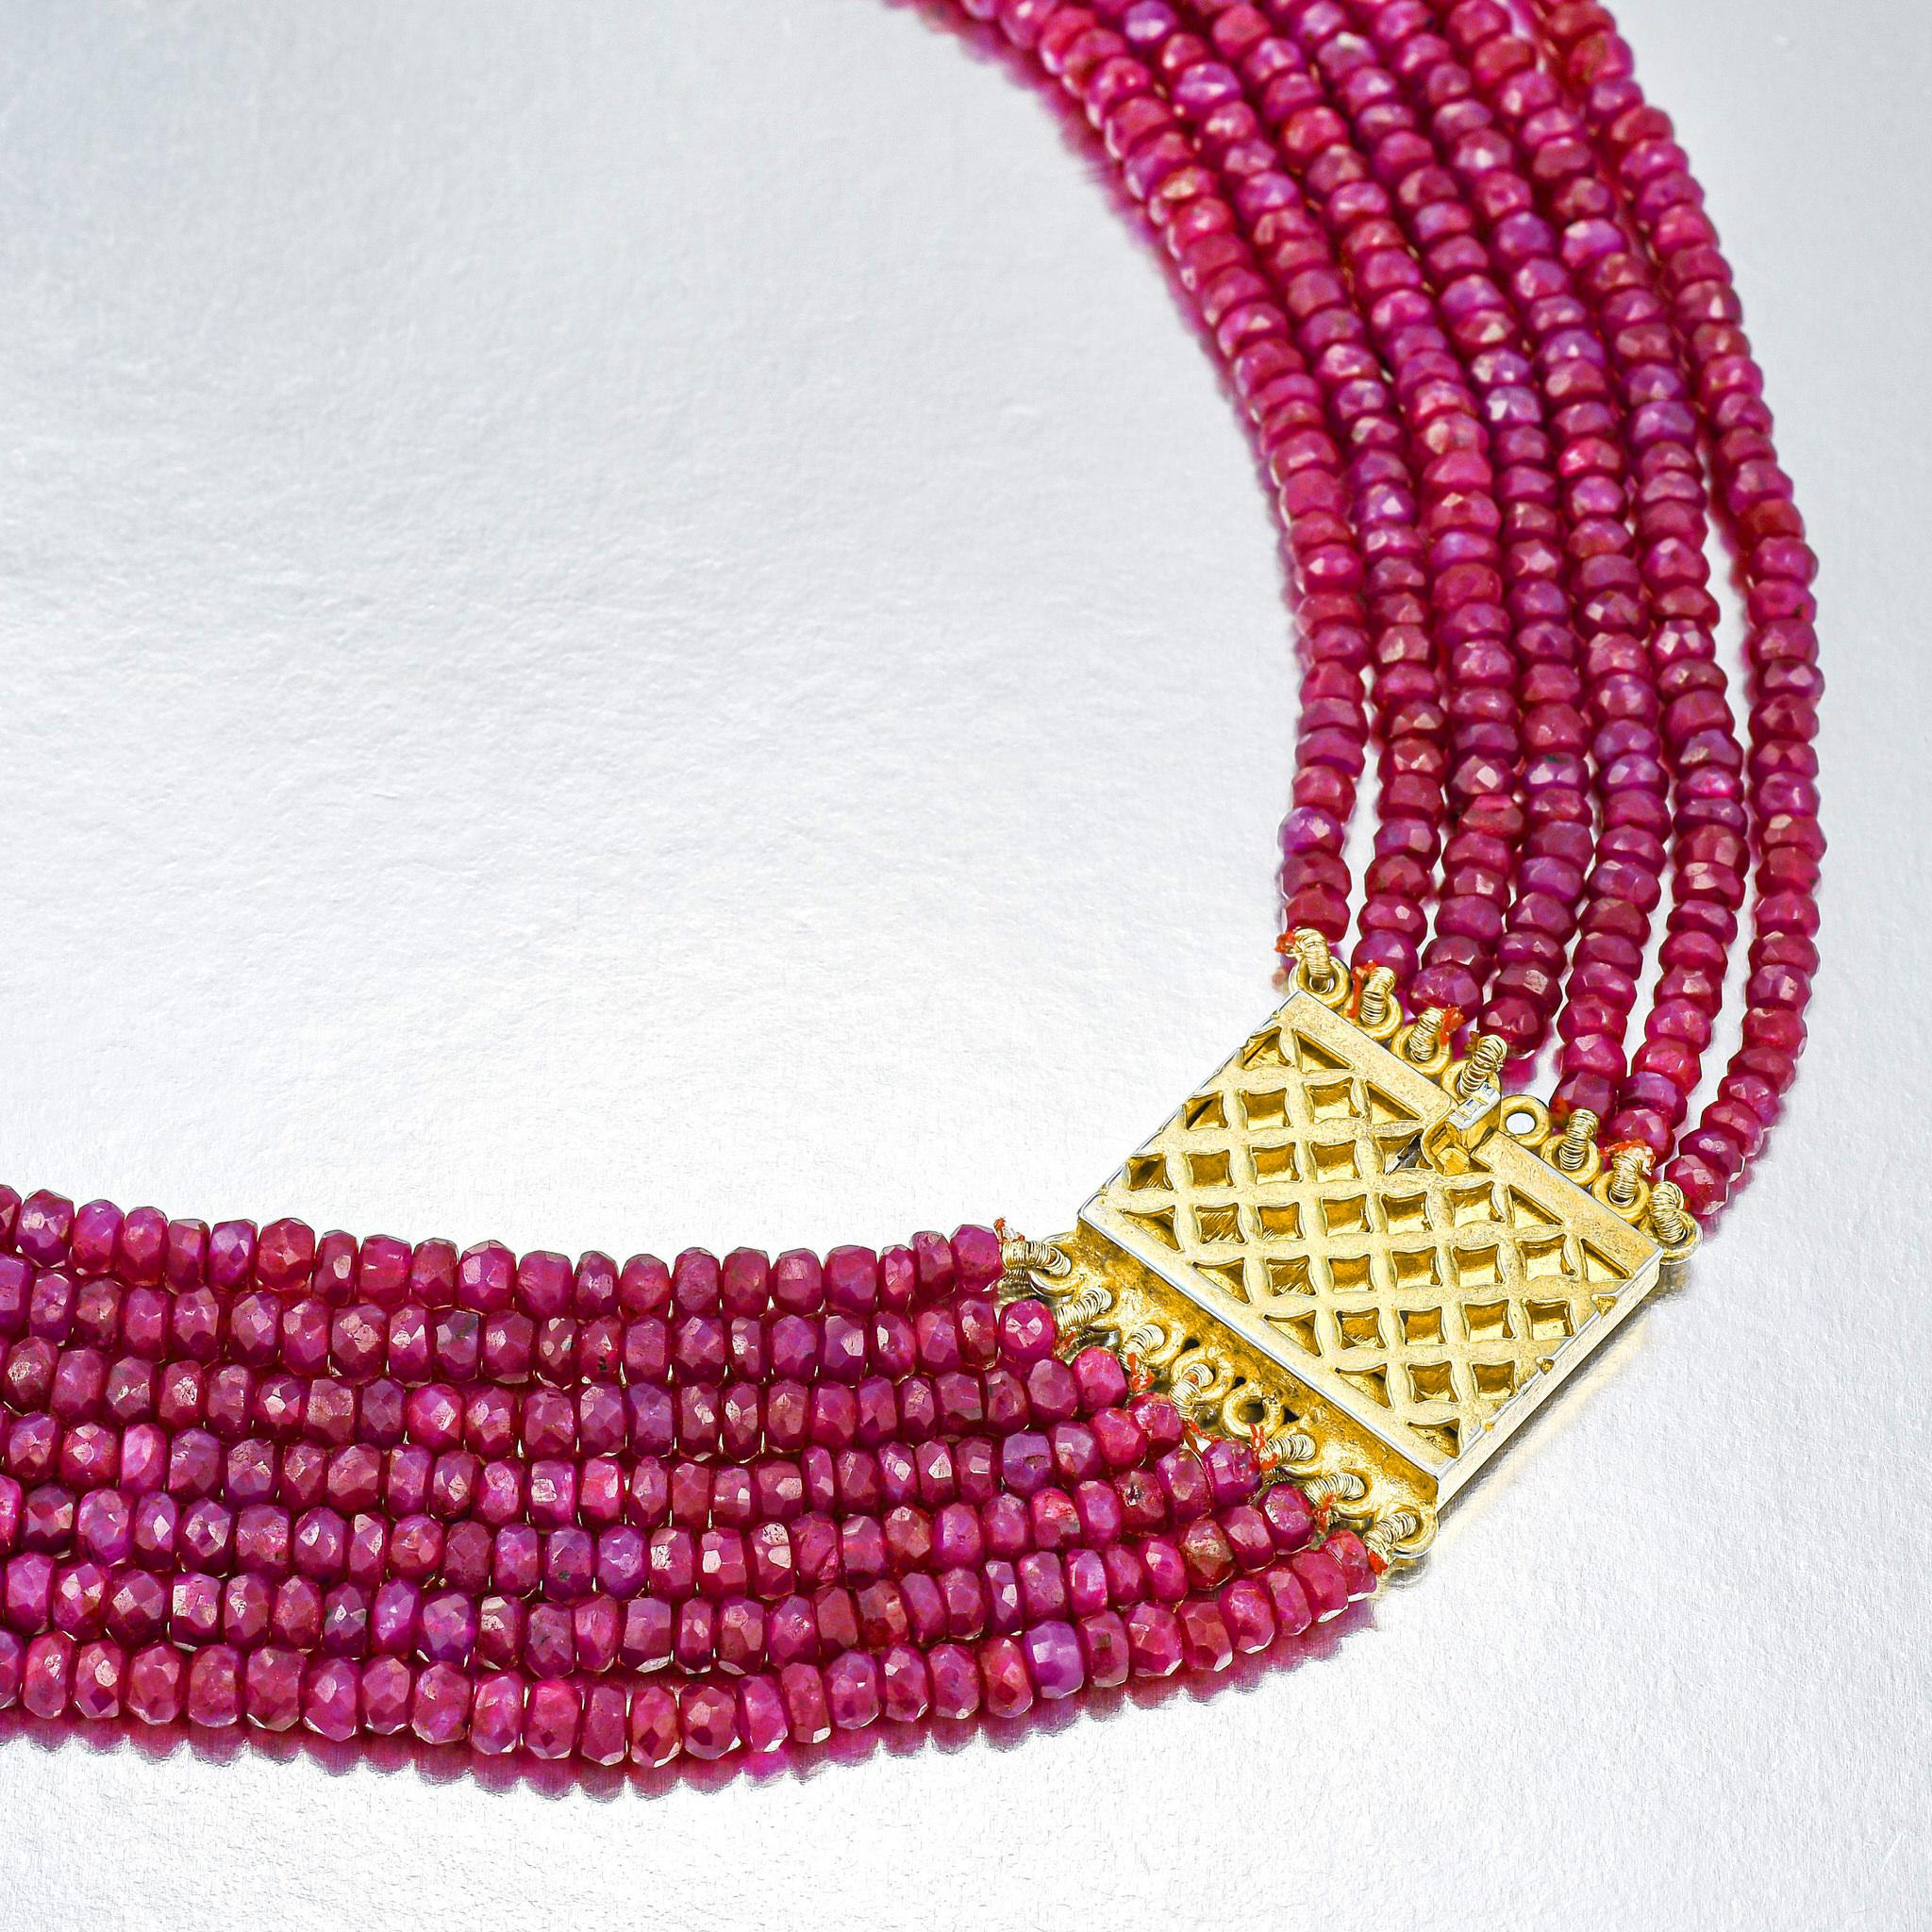 Important 560 Carats Ruby Bead Multi-Strand Necklace 16 Inches For Sale 1